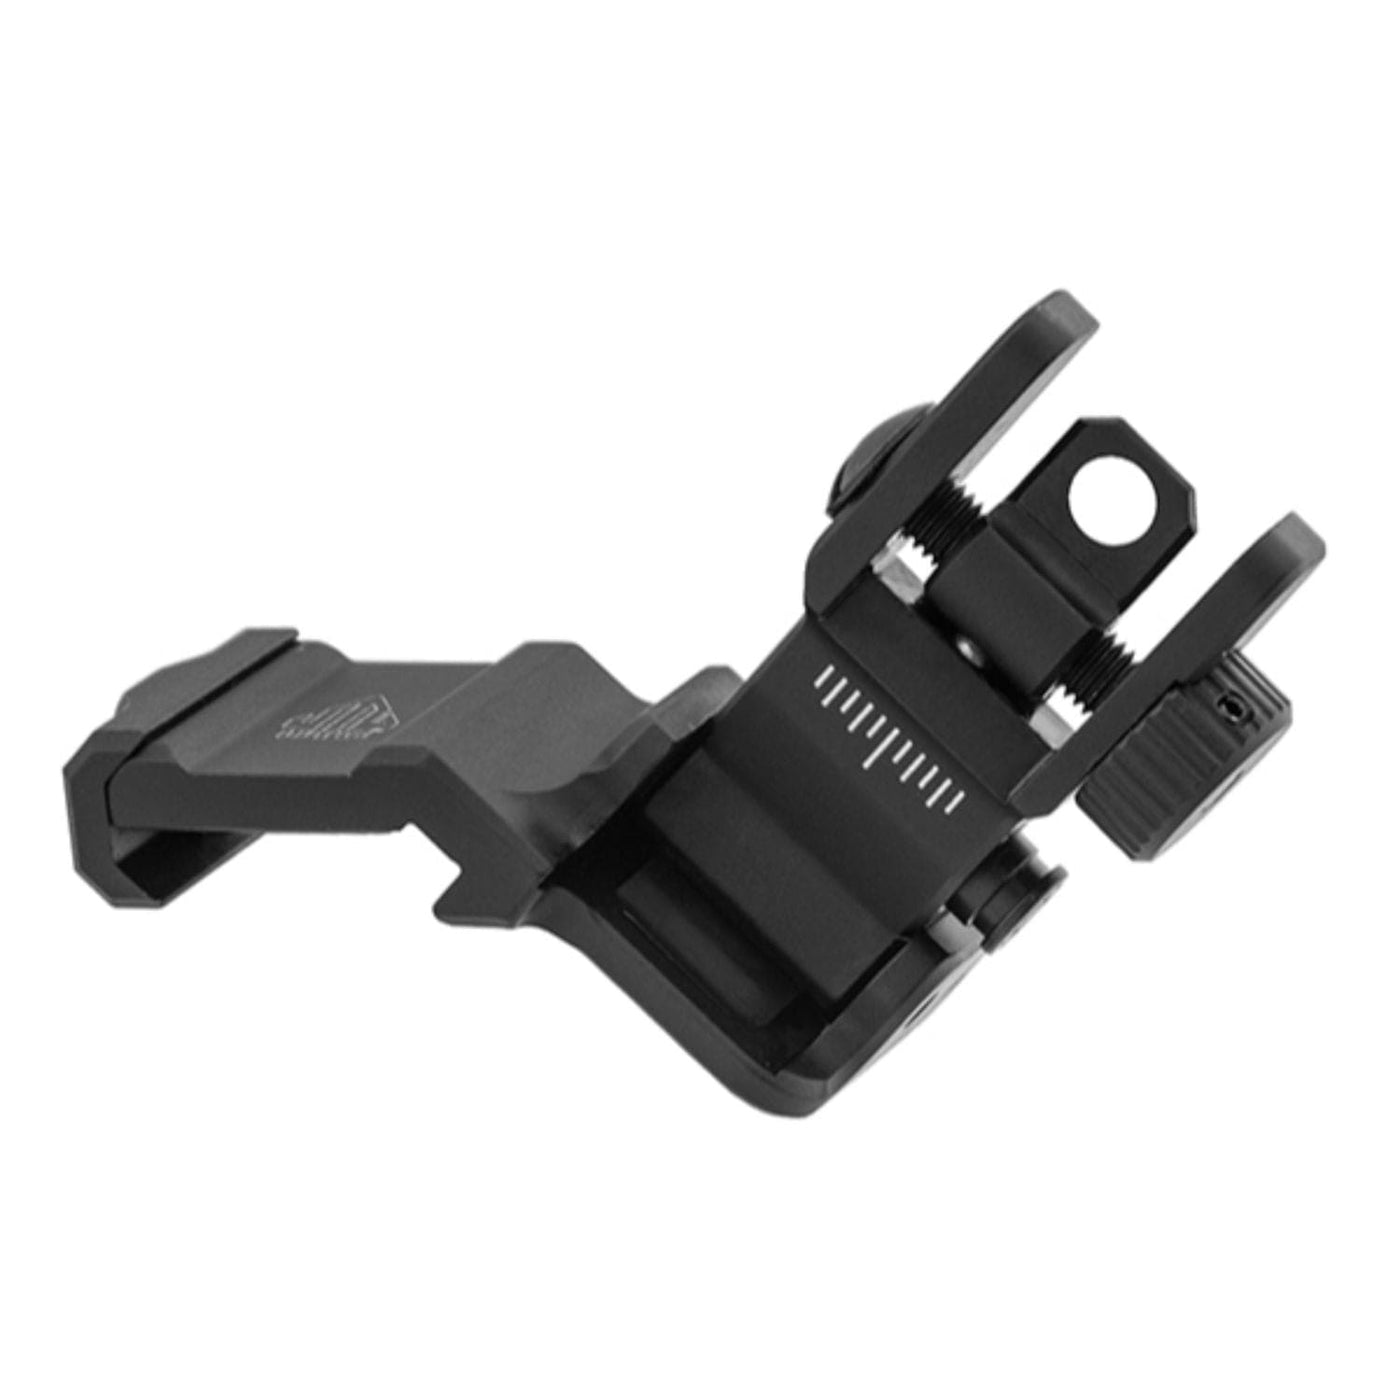 Leapers Leapers UTG ACCU-SYNC 45 Degree Angle Flip Up Rear Sight Optics And Sights